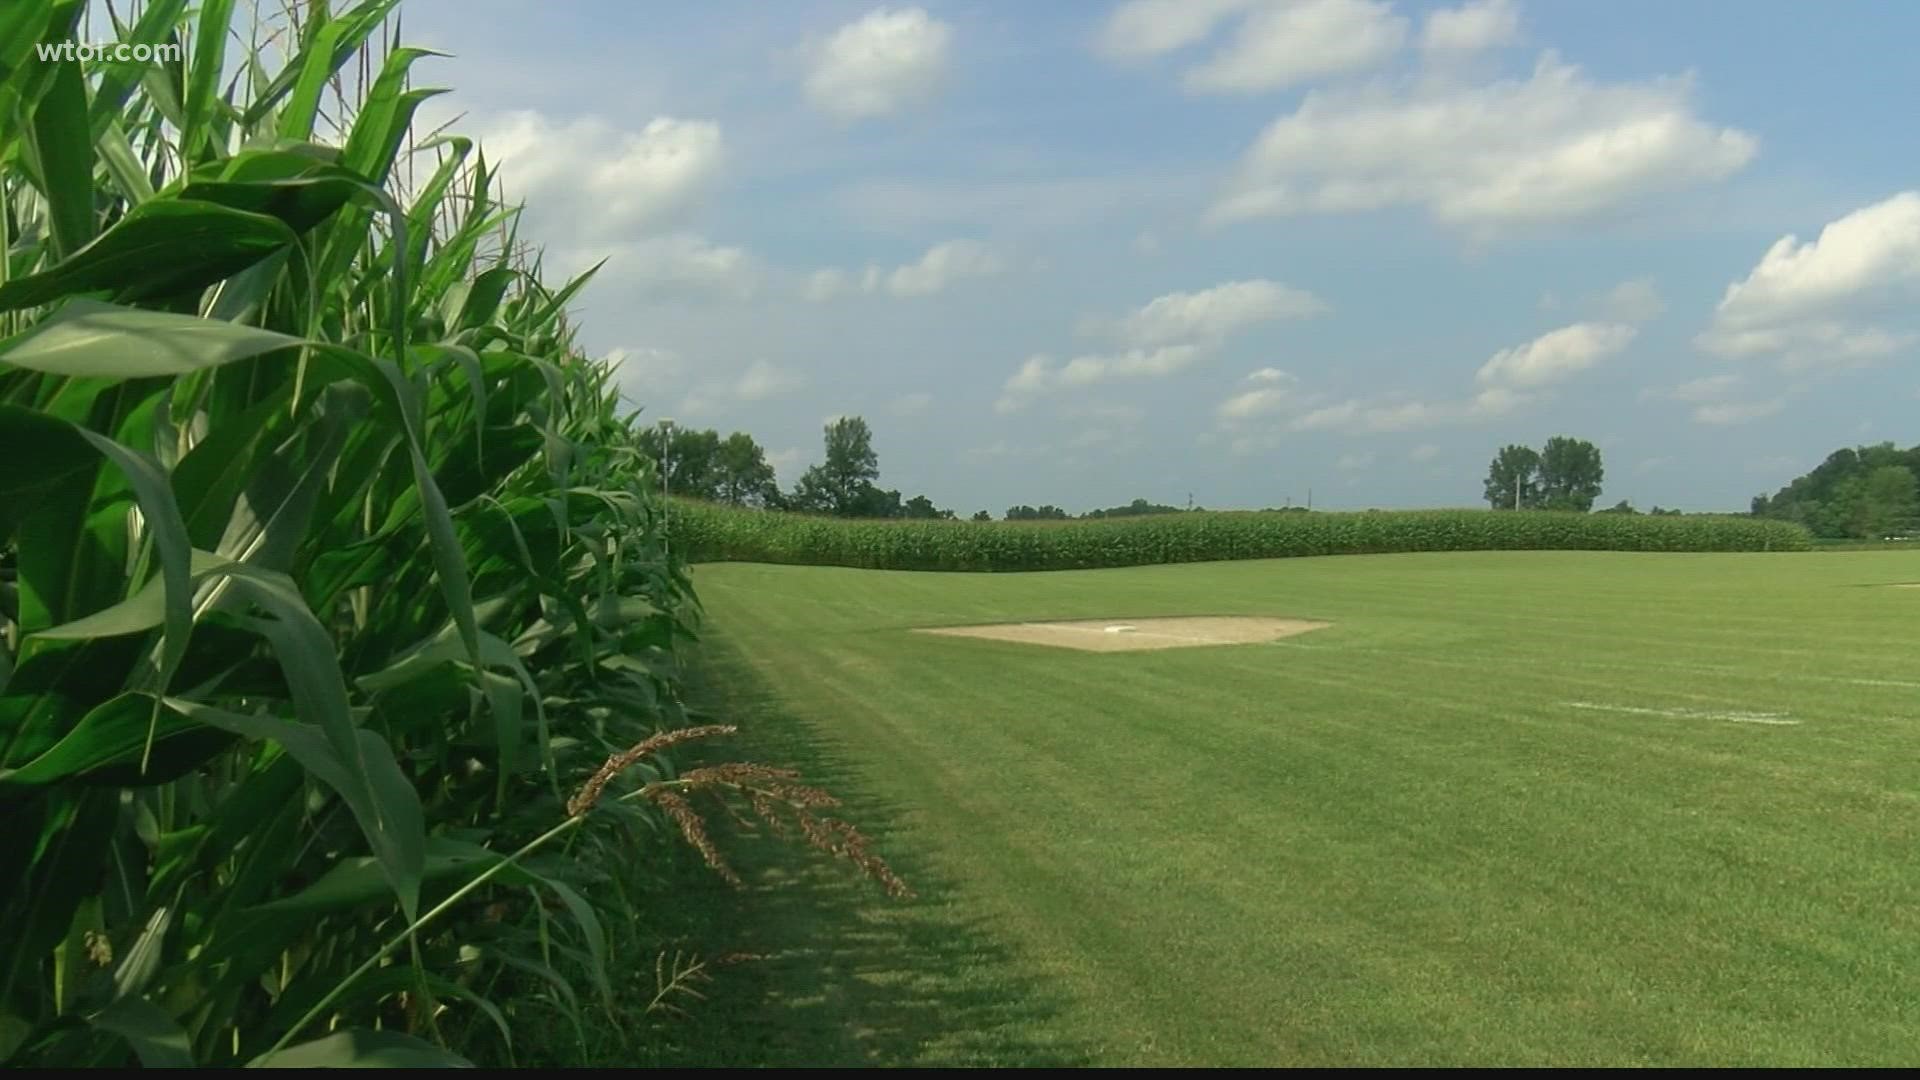 A baseball field built in Pioneer, Ohio created a lifelong bond between a father and son and is bringing generations of baseball fans together.